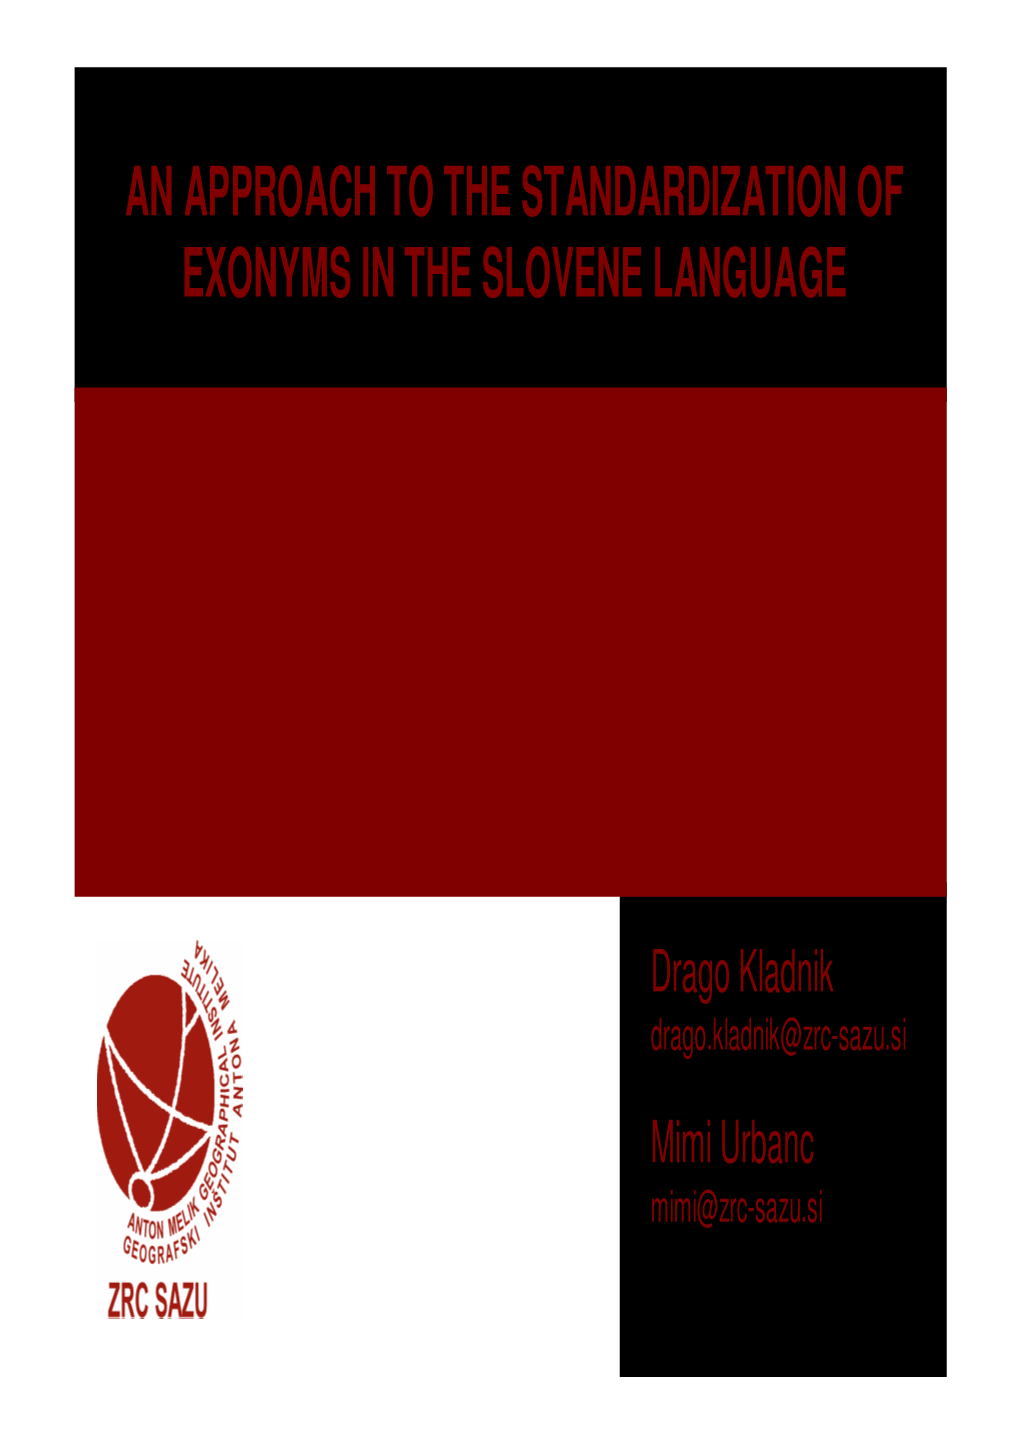 An Approach to the Standardization of Exonyms in the Slovene Language